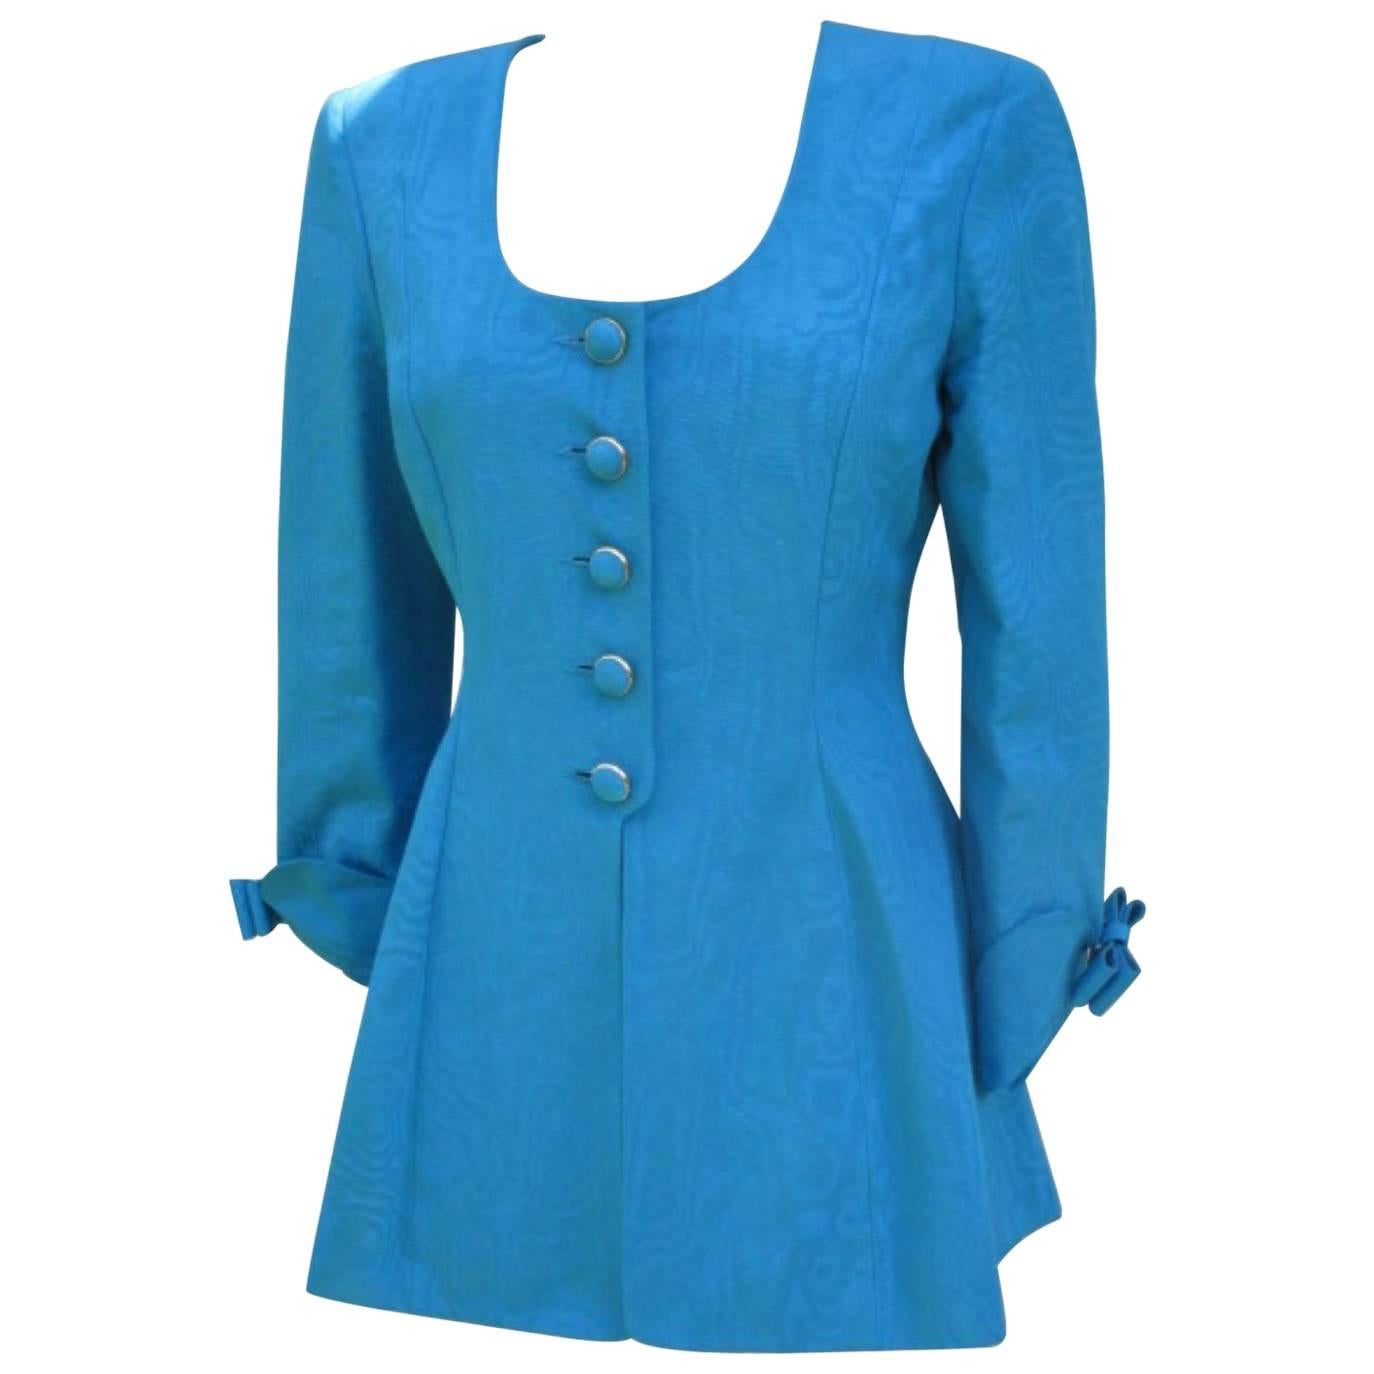 Nina Ricci paris turquoise bows jacket with skirt  For Sale